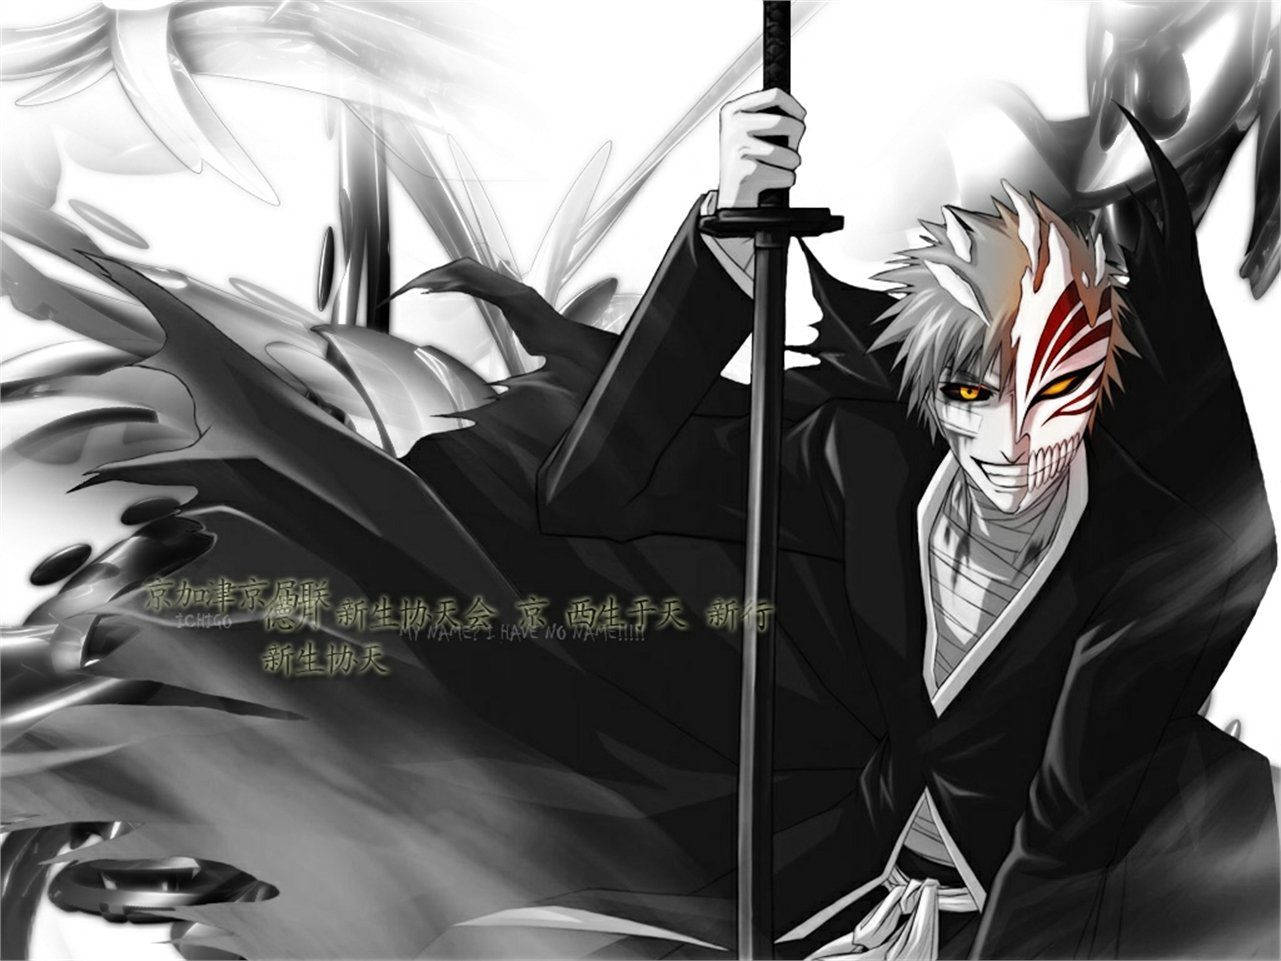 1281X961 Bleach Wallpaper and Background